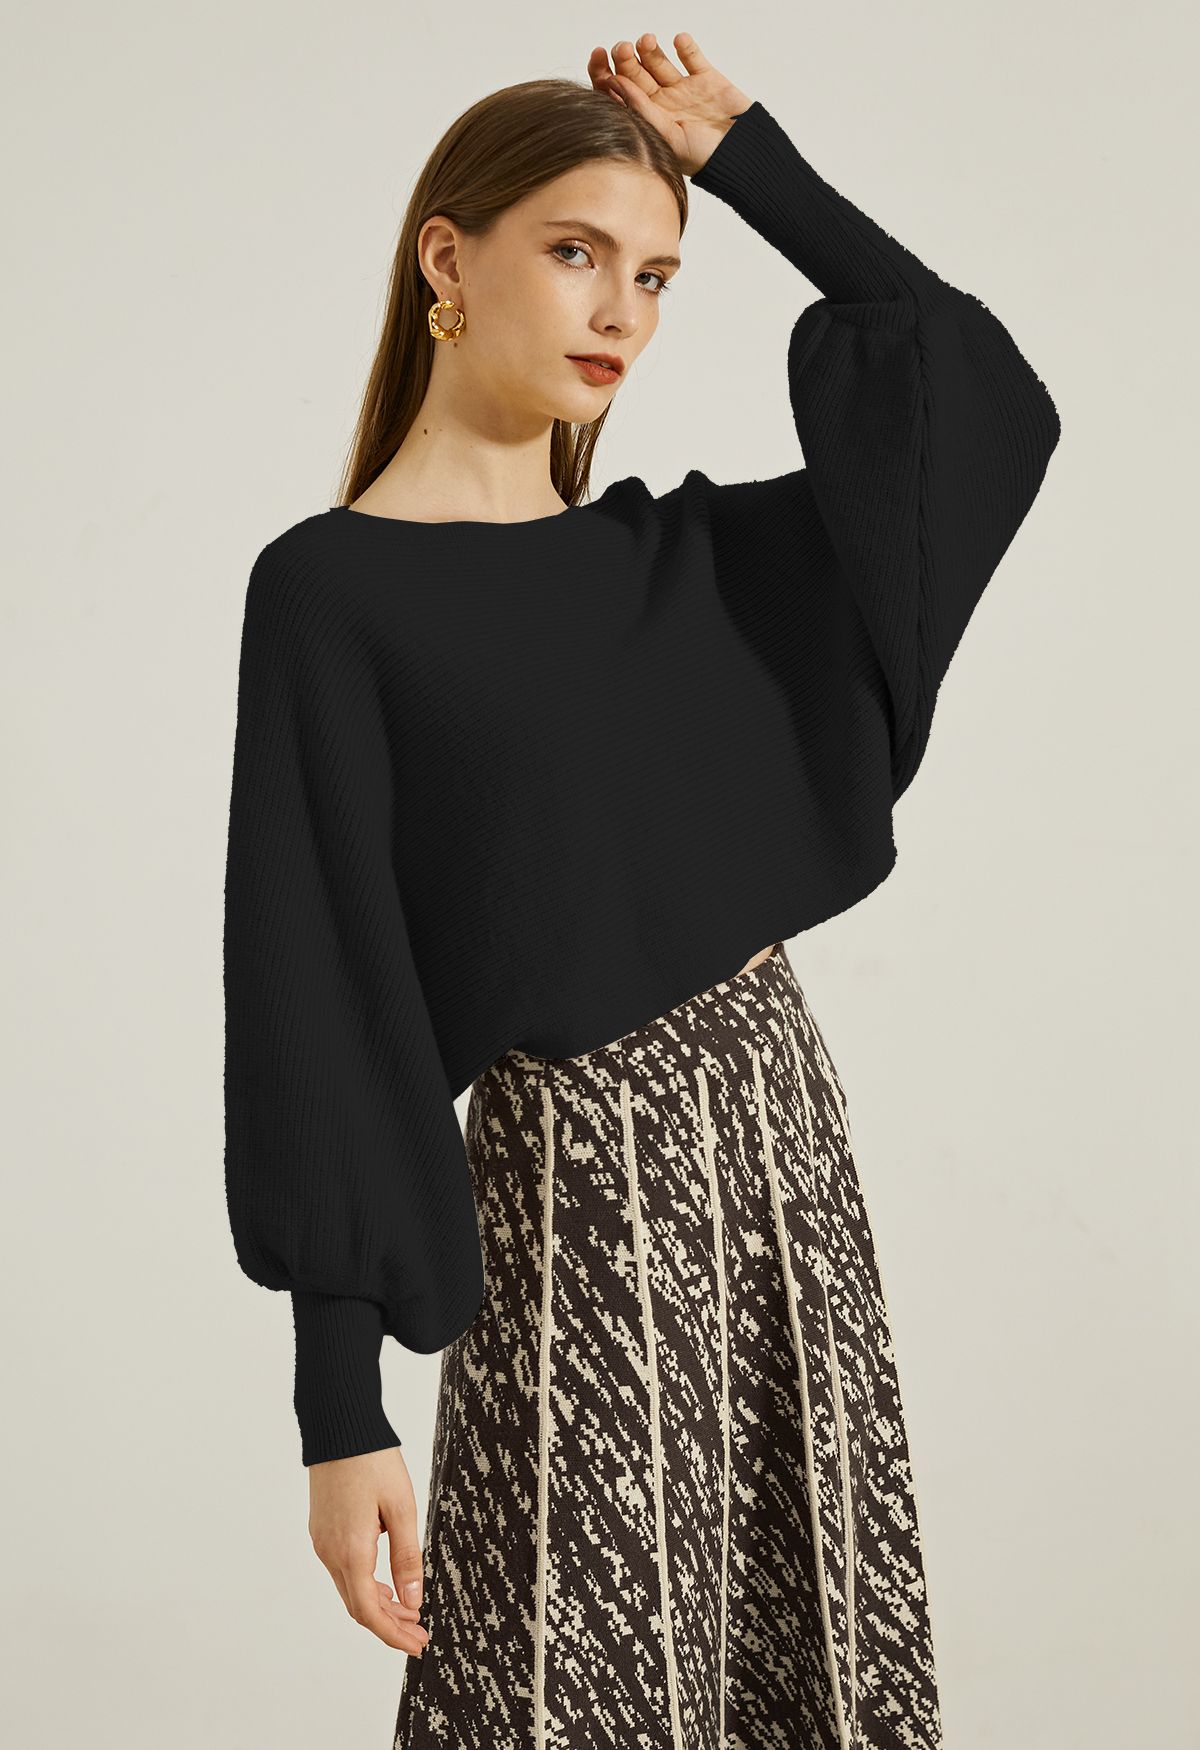 Exaggerated Bubble Sleeve Boat Neck Knit Top in Black